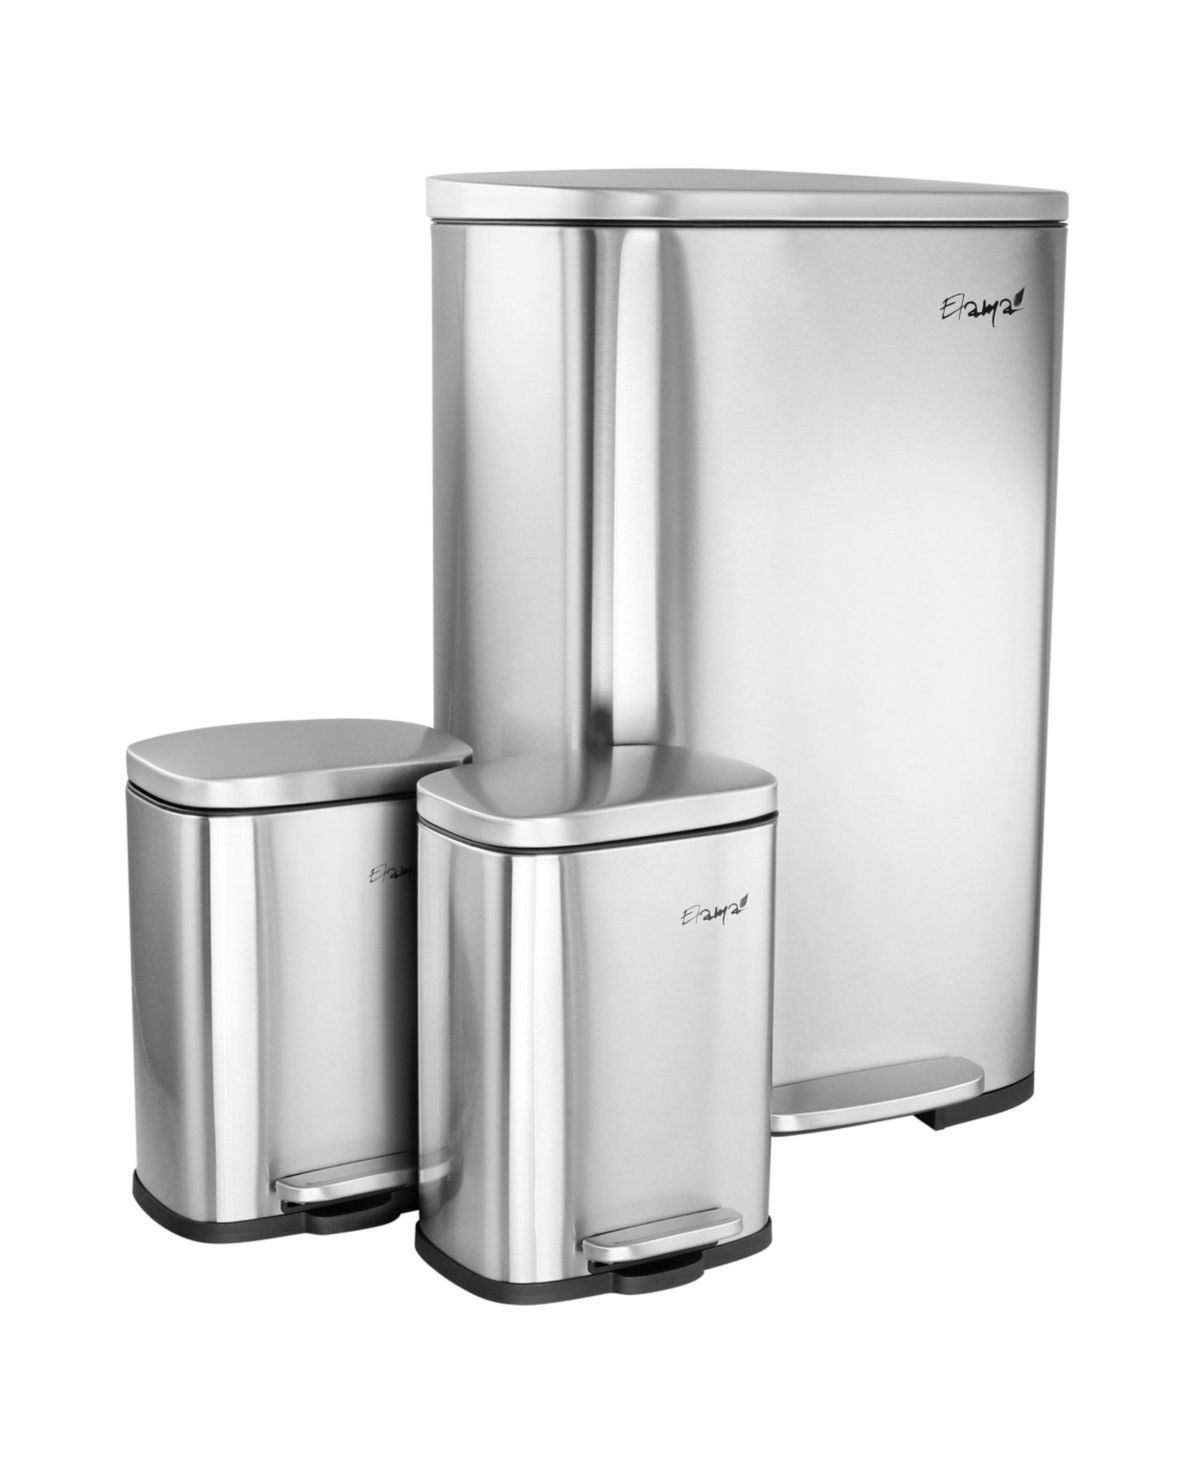 3 Piece 50 Liter and 5 Liter Stainless Steel Step Trash Bin Combo Set with Slow Close Mechanism - Silver